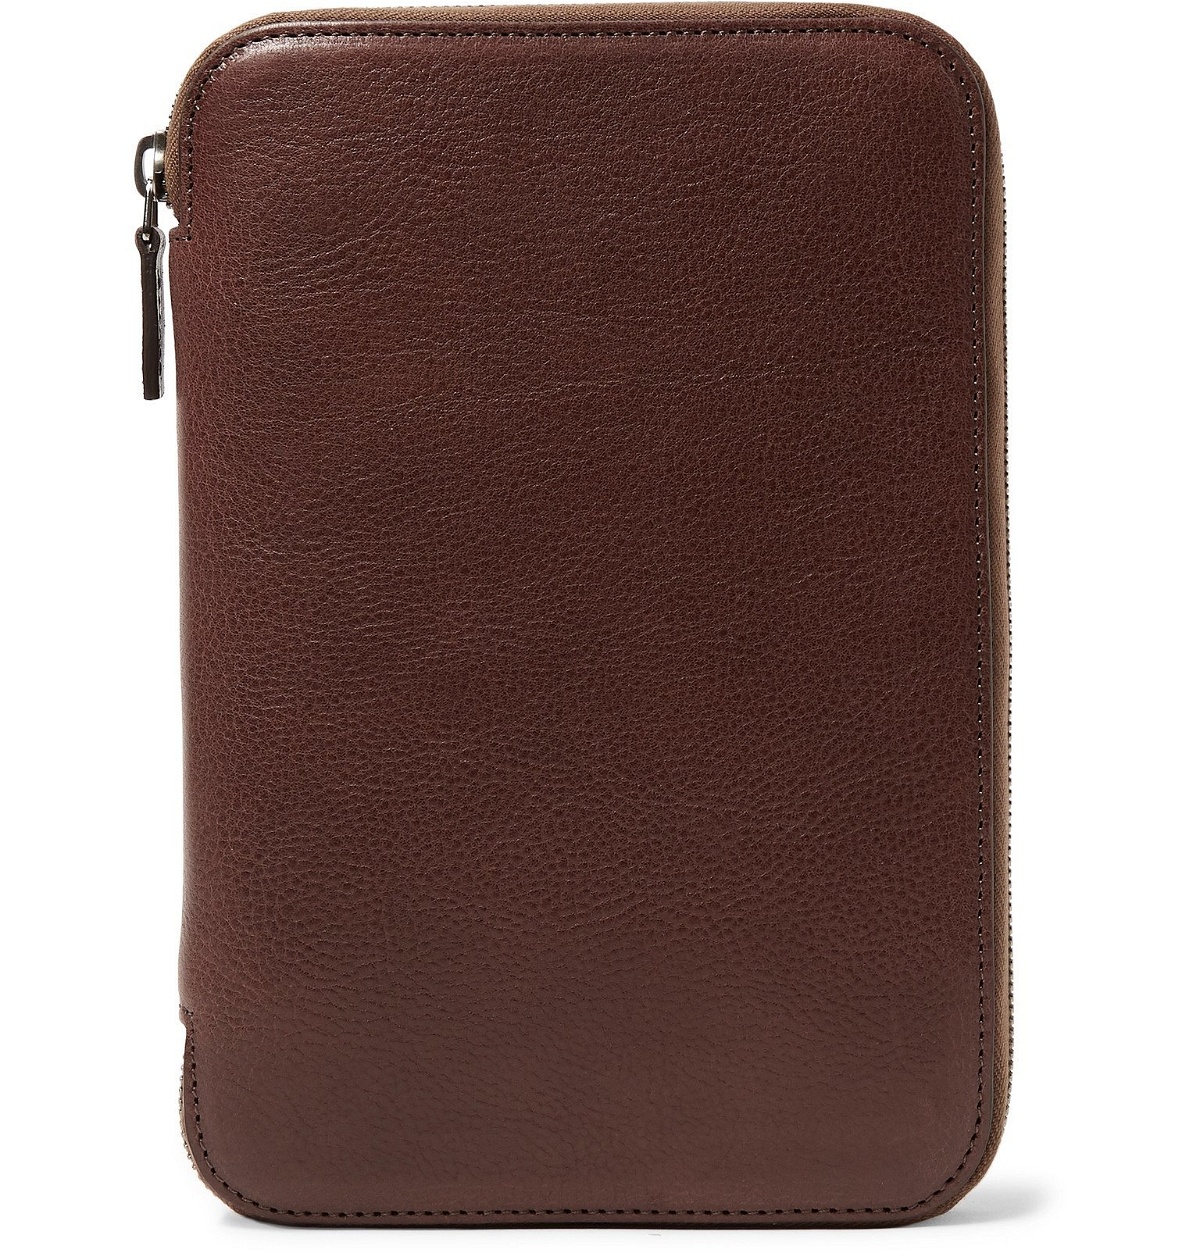 Photo: This Is Ground - Mod Tablet Mini Full-Grain Leather Pouch - Brown